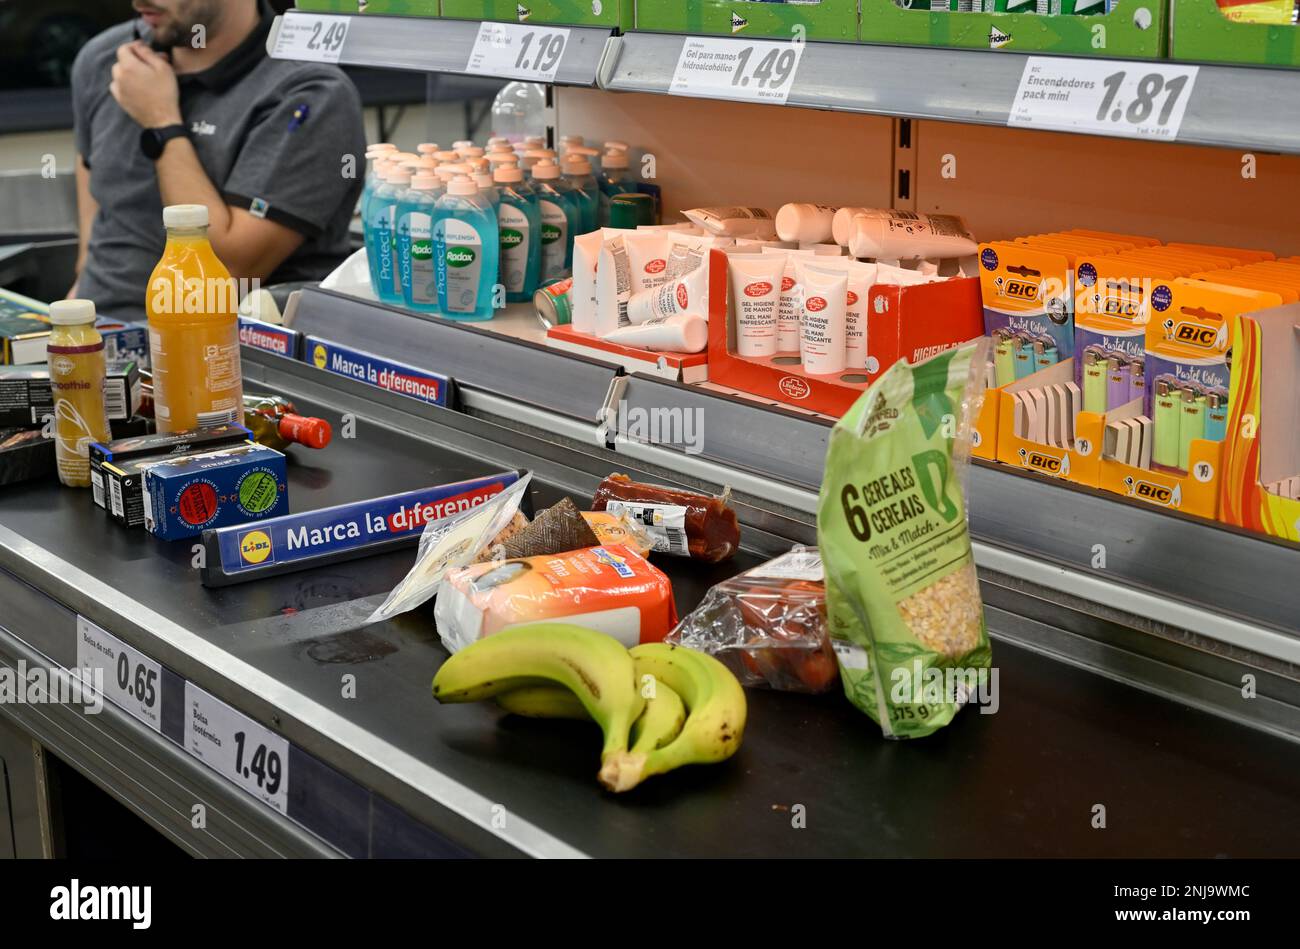 Food on conveyor belt at supermarket checkout with impulse purchase sale items, Lidl Stock Photo